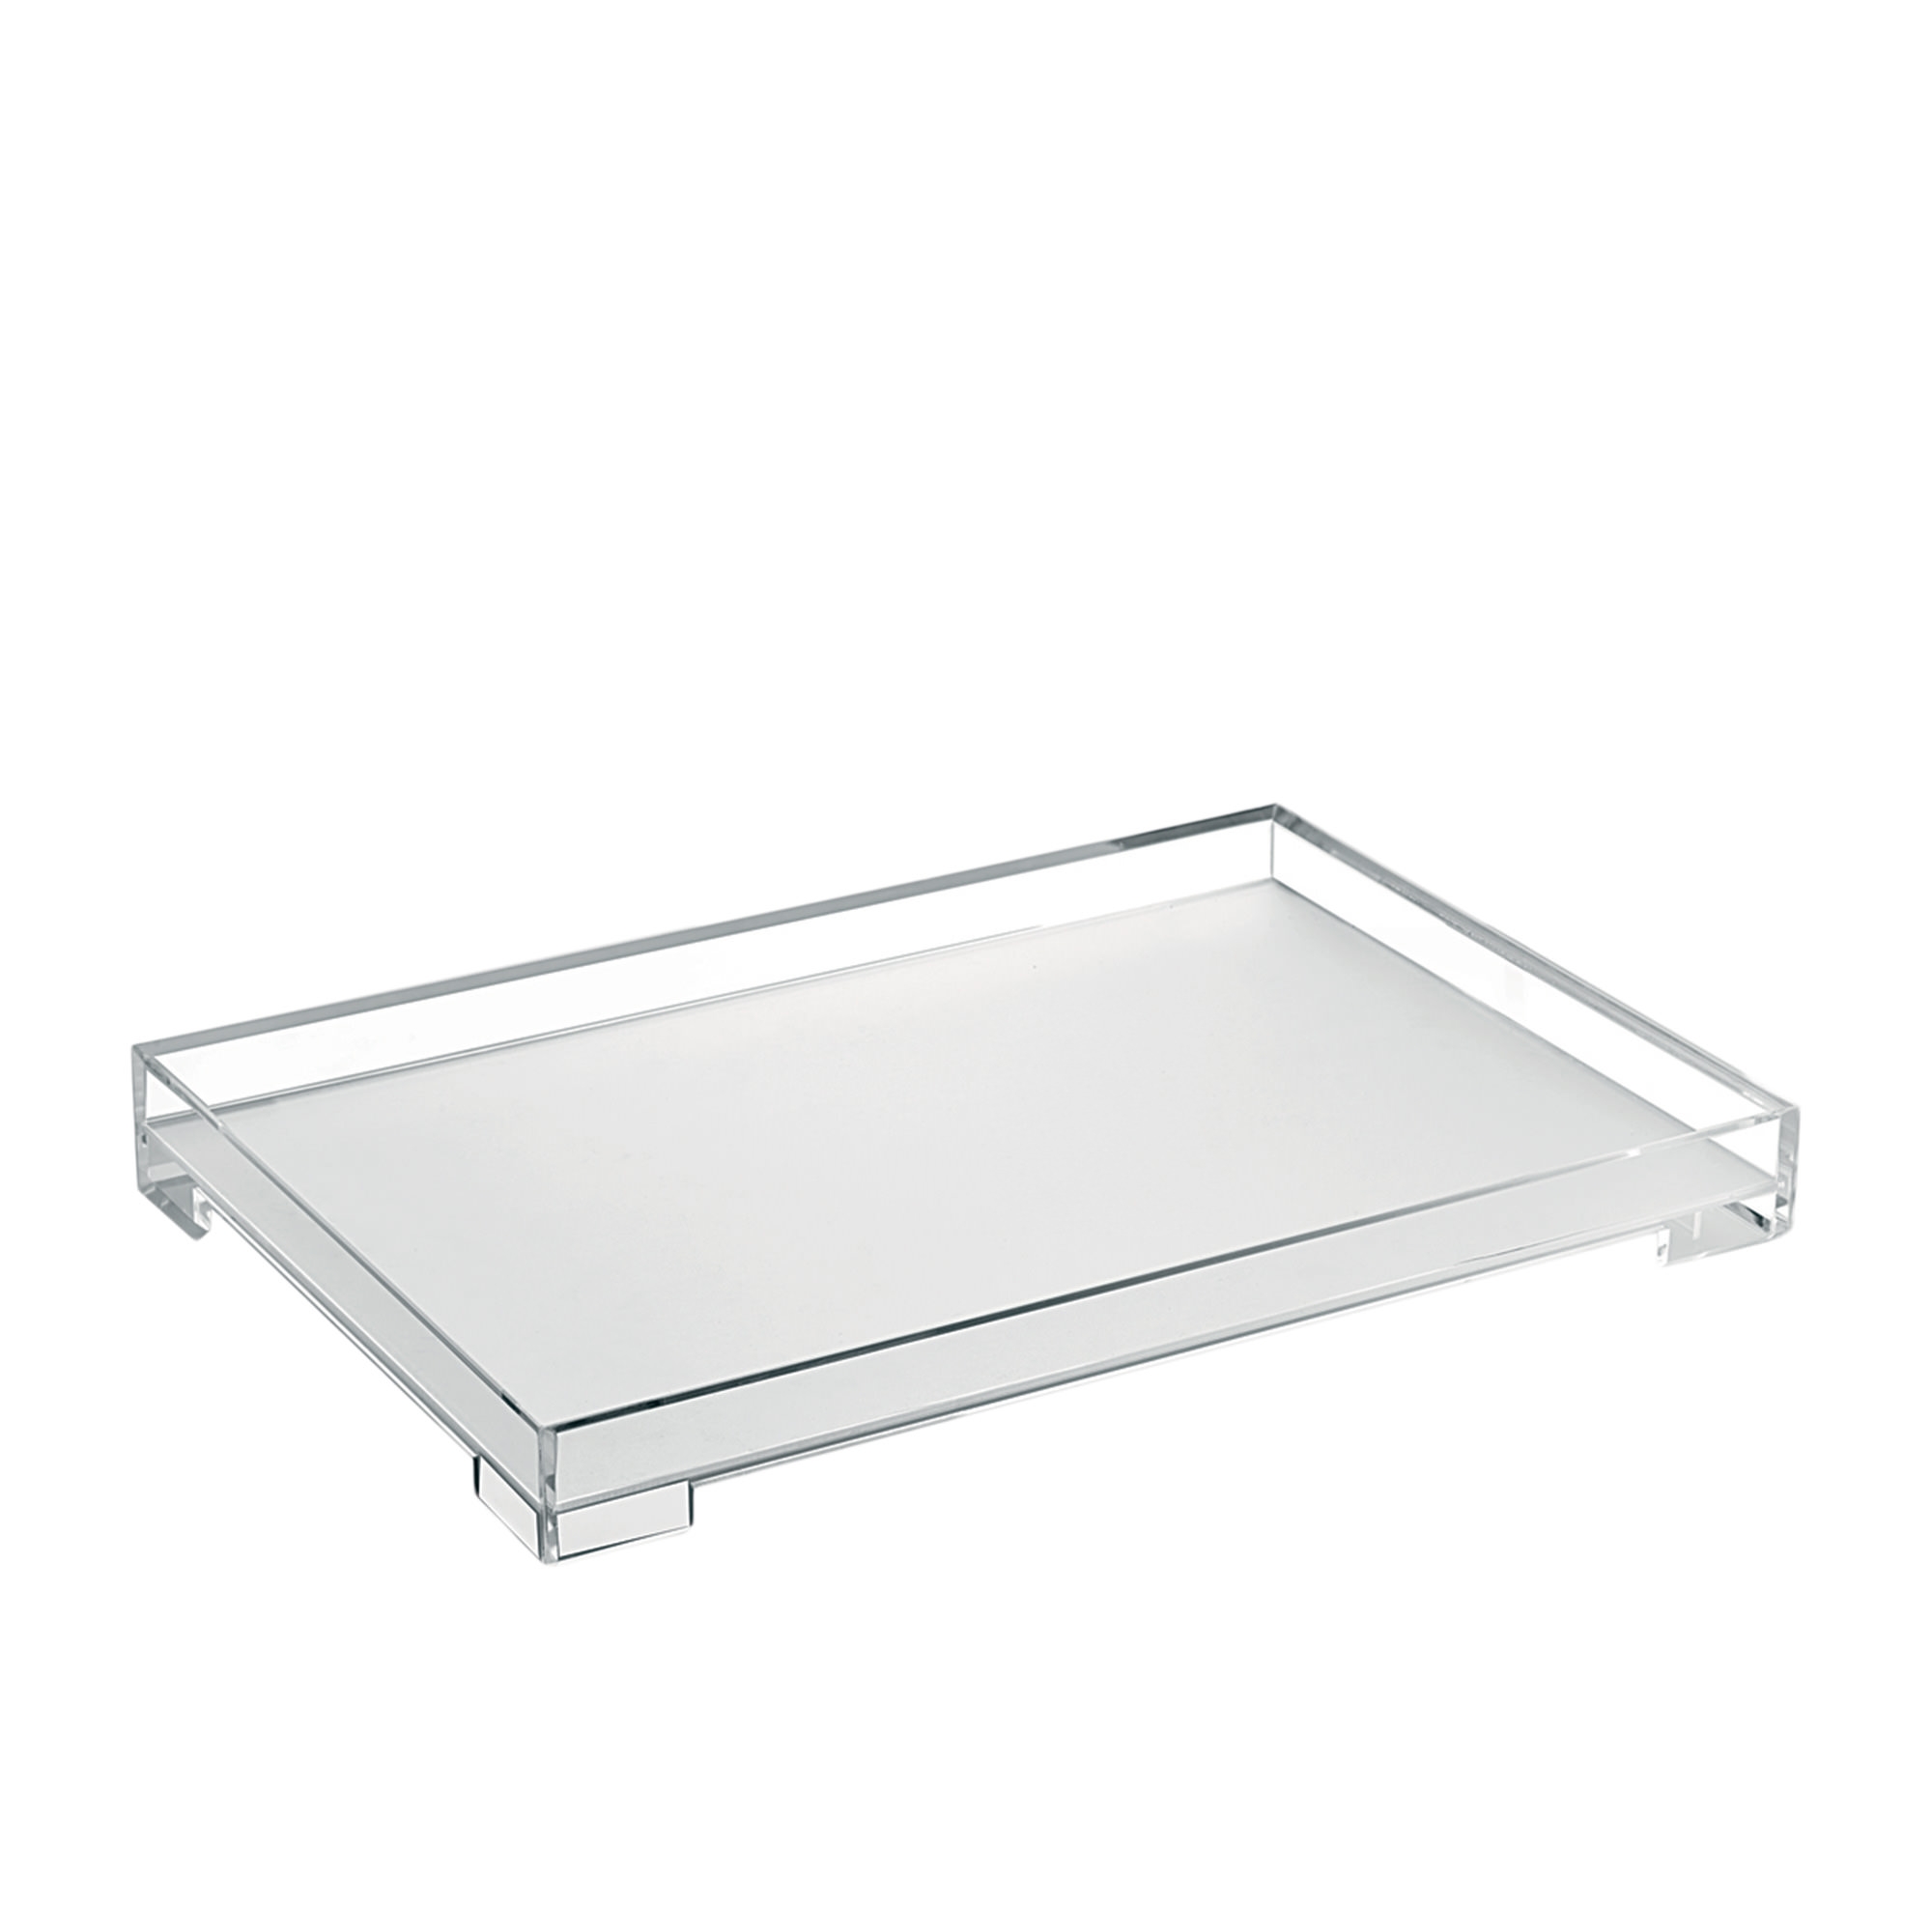 Guzzini Essence Serving Tray Large Clear Image 1